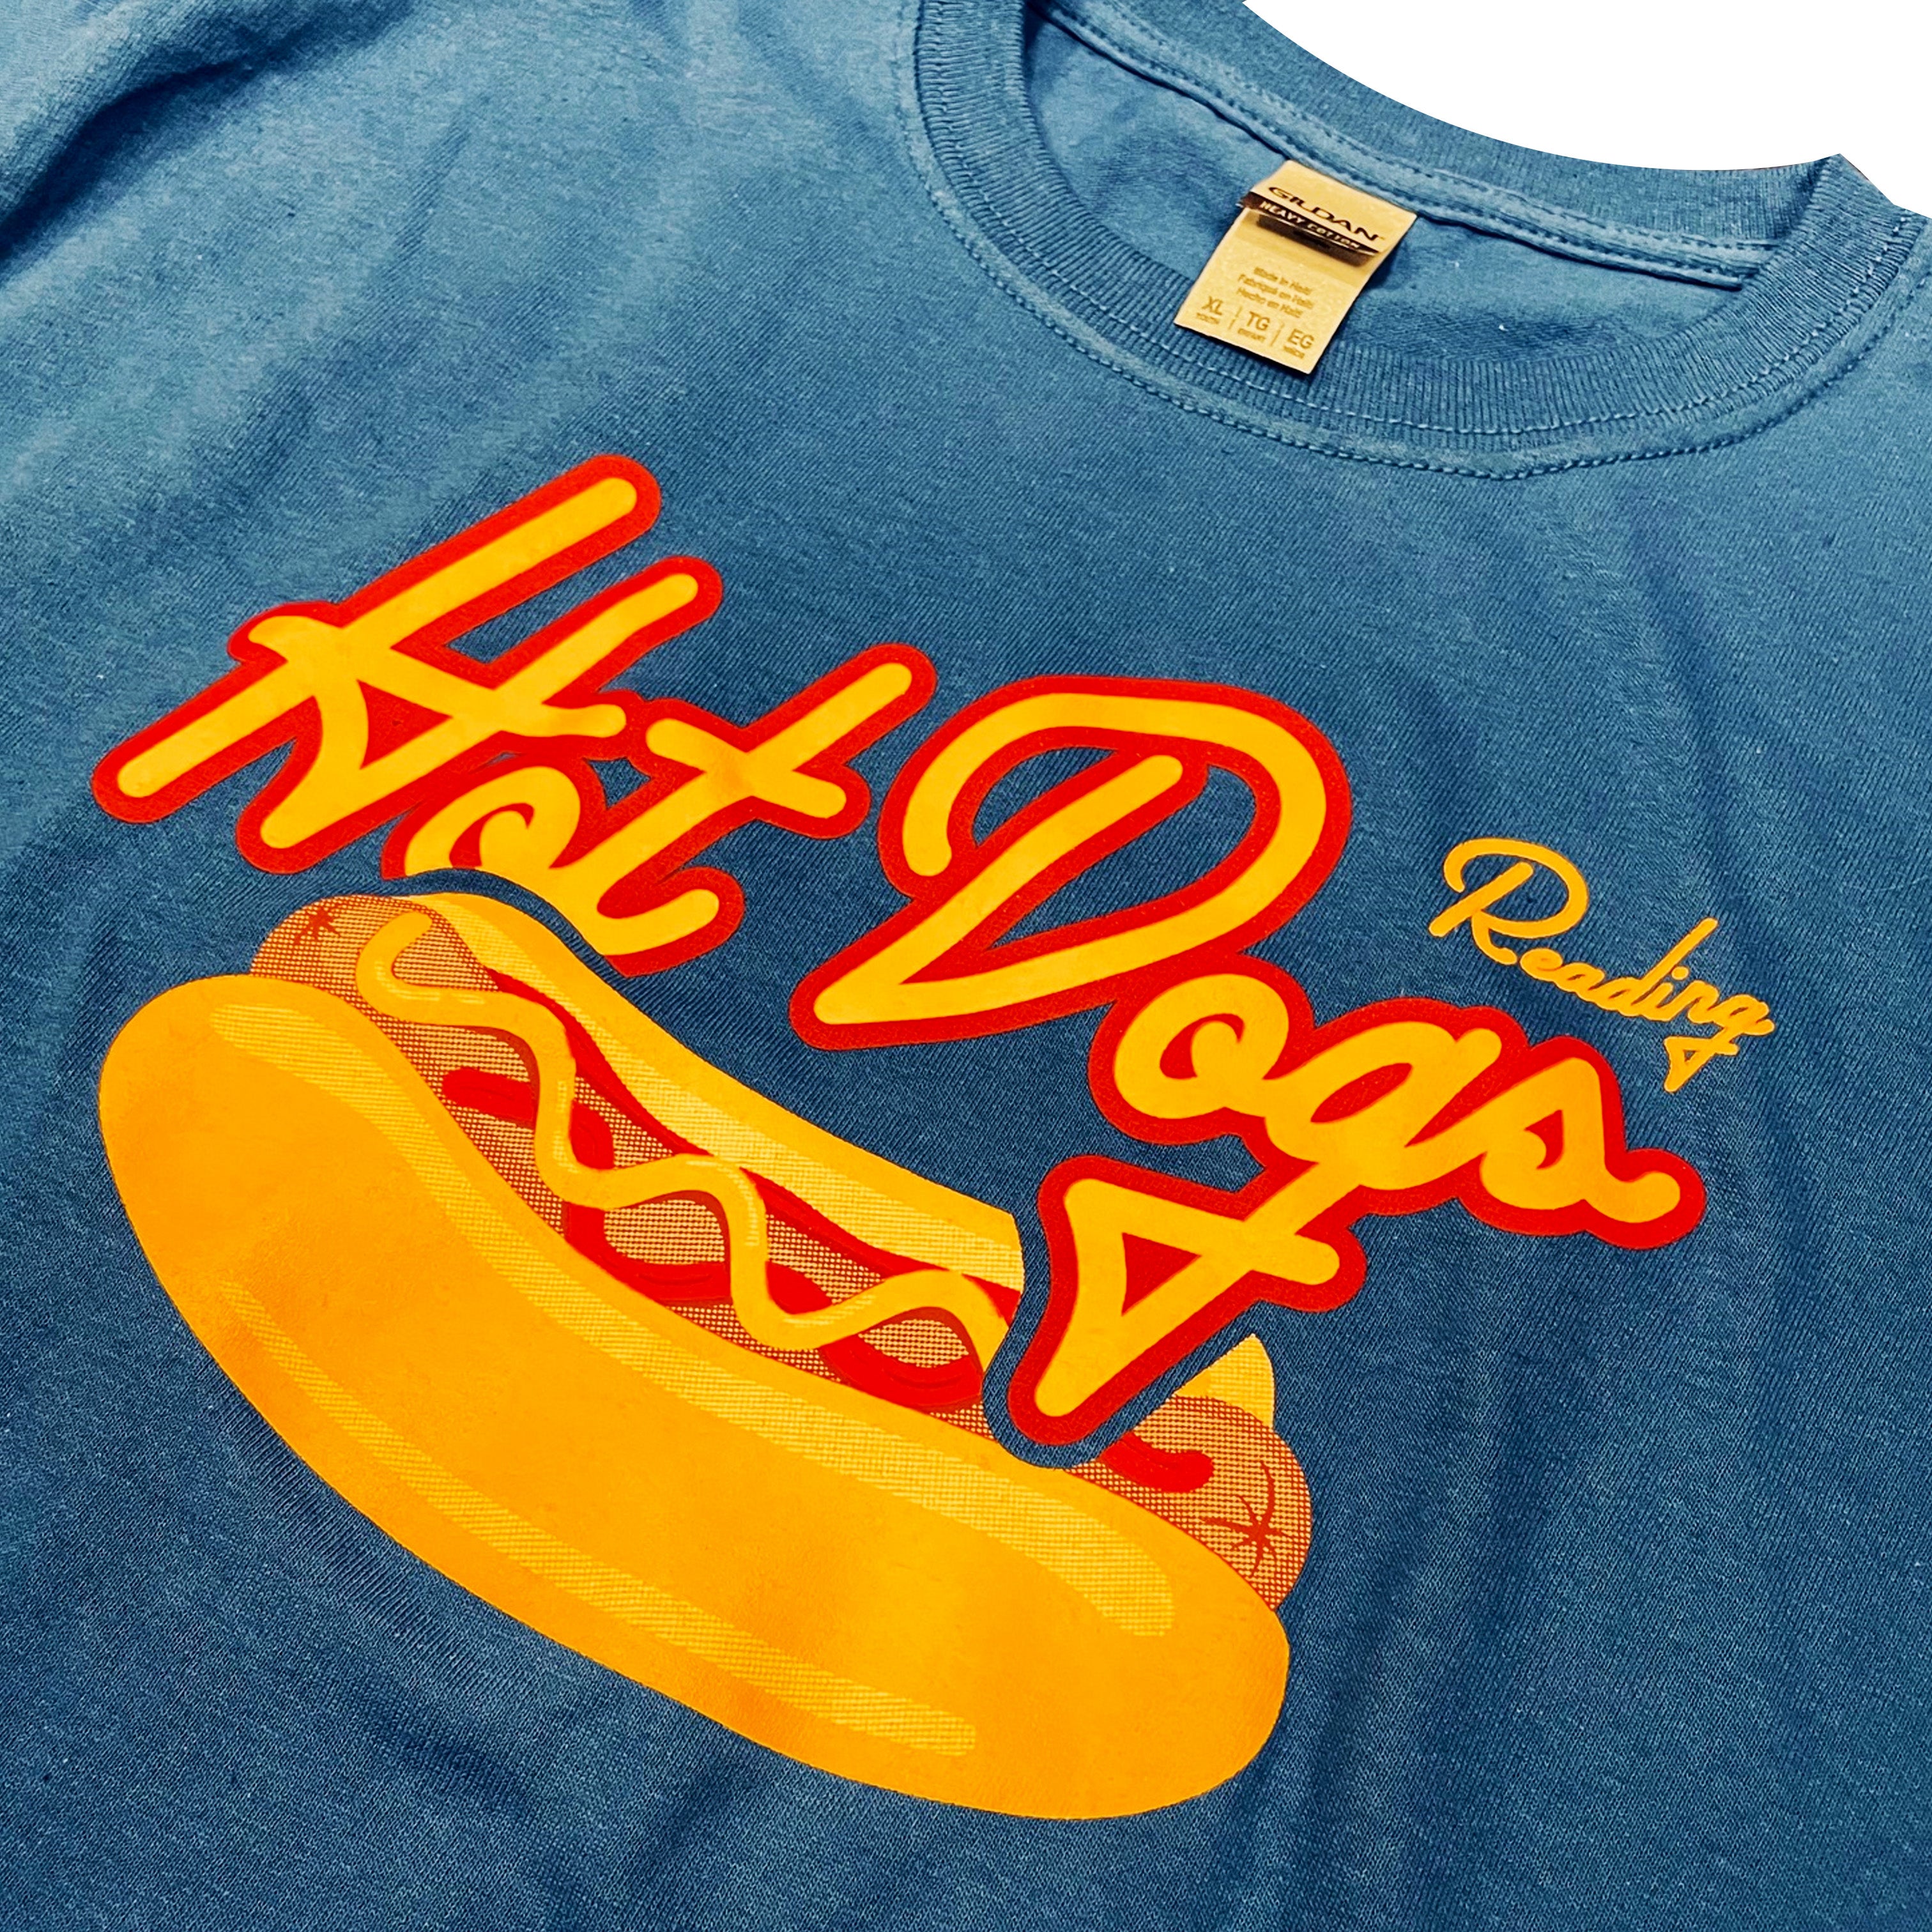 Reading Hot Dogs Youth T-Shirt Yth SM